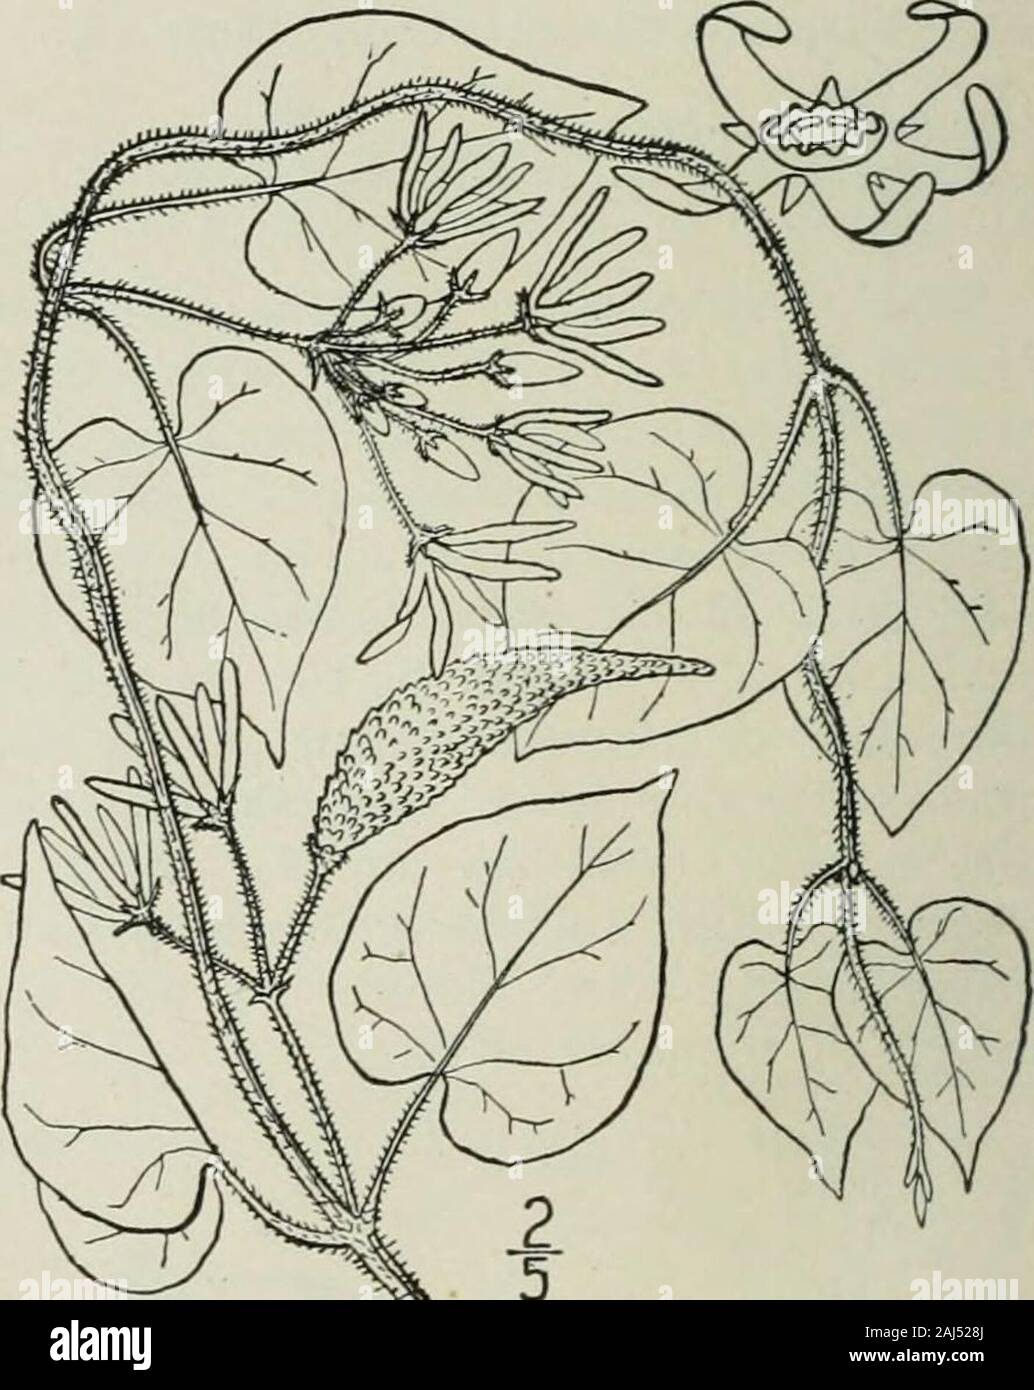 An illustrated flora of the northern United States, Canada and the British possessions : from Newfoundland to the parallel of the southern boundary of Virginia and from the Atlantic Ocean westward to the 102nd meridian . 5. Vincetoxicum carolinense (Jacq.) Britton.Carolina incetoxicum. Fig. 3420. Cynanchum carolinense Jacq. Coll. 2: 228. 1788.G. carolinensis R. Br.; R. & S. Syst. 6: 62. 1820.V. carolinense Britton, Mem. Torr. Club 5 : 265. 1894. Stem hirsute. Leaves broadly ovate, acute orshort-acuminate at the apex, deeply cordate at thebase with a narrow or closed sinus, 3-/ long, 2-shwide, Stock Photo